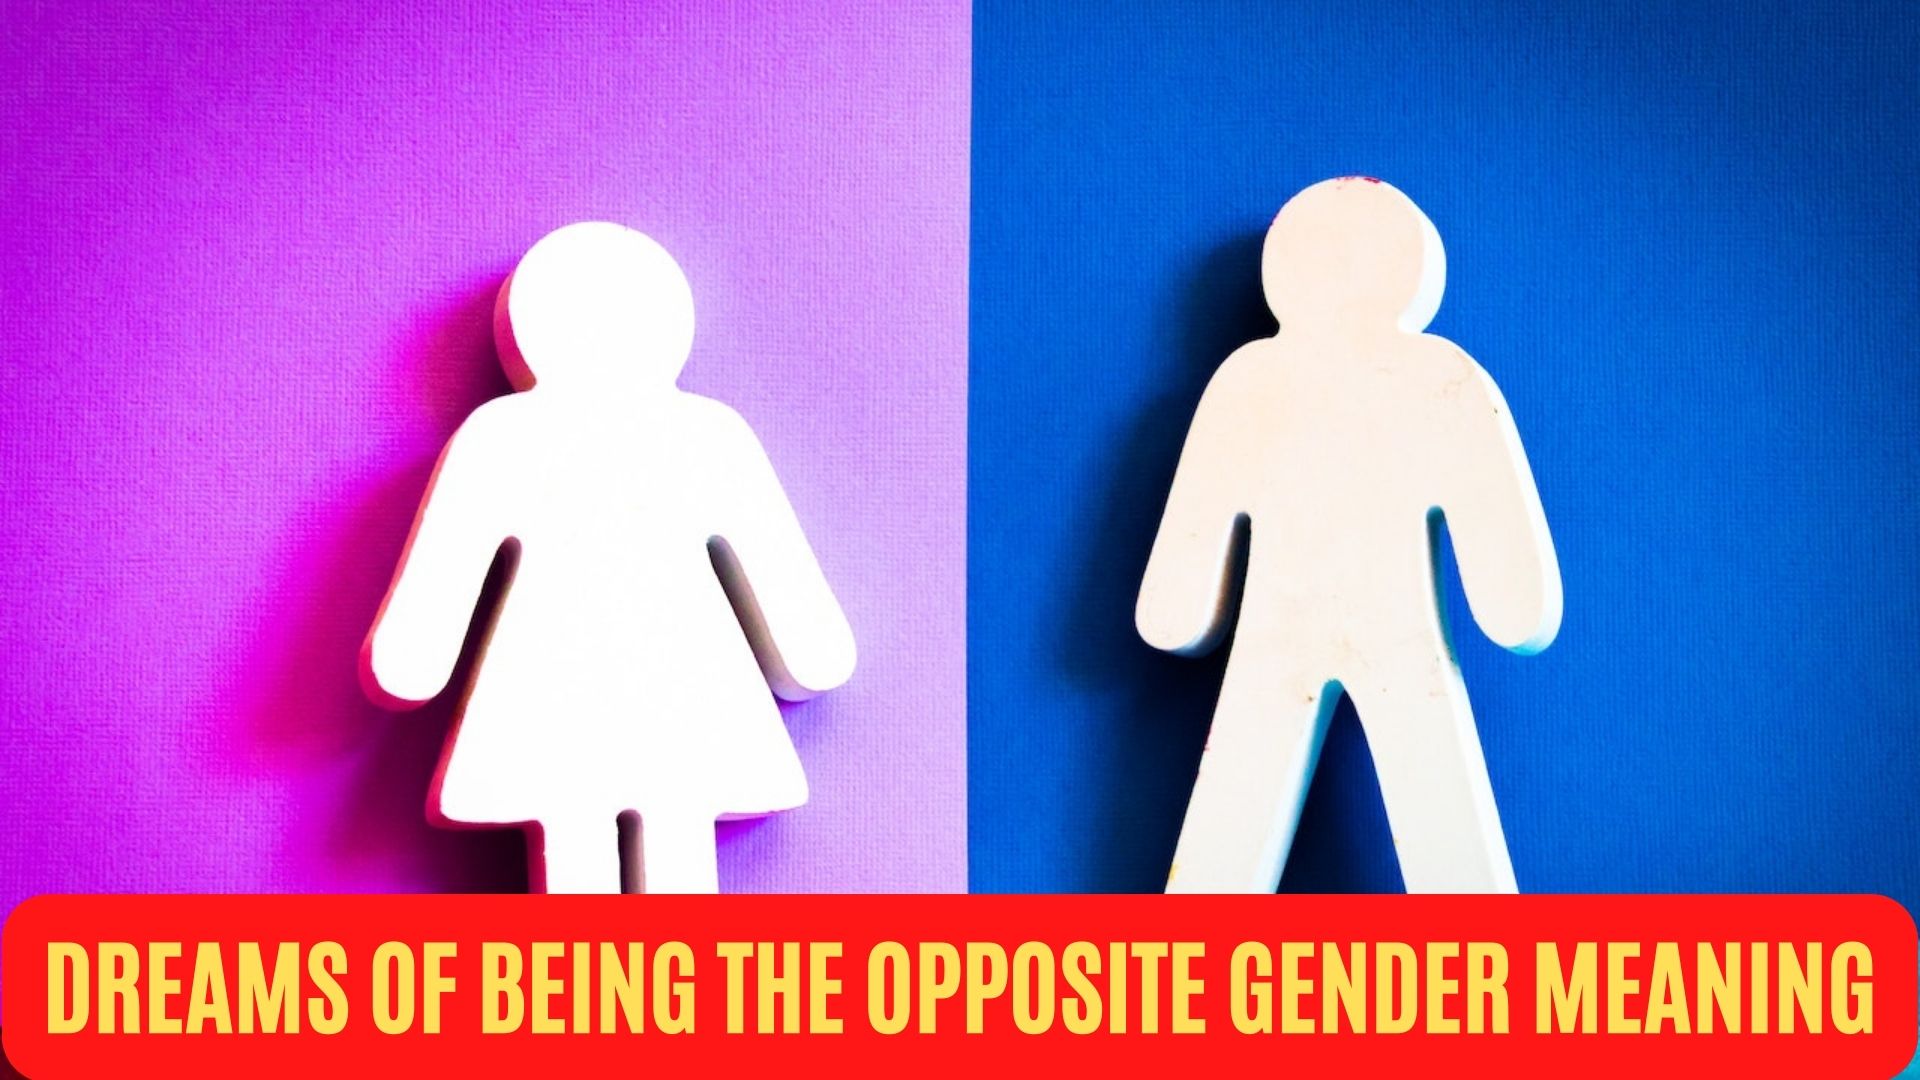 Dreams Of Being The Opposite Gender Meaning Stands For Your Culture And Tradition